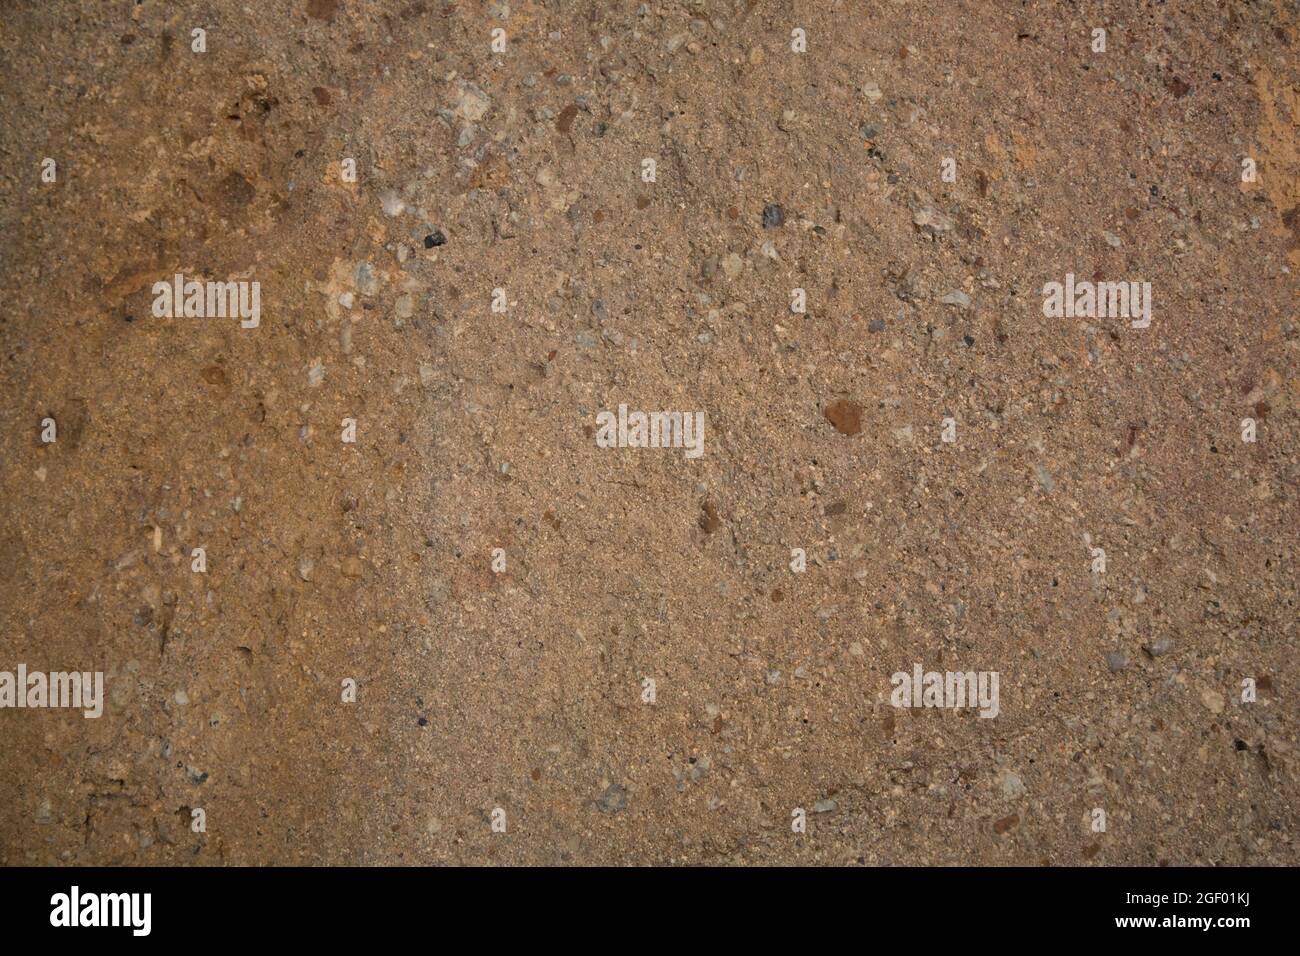 Stone texture with various smooth and porous shapes Stock Photo